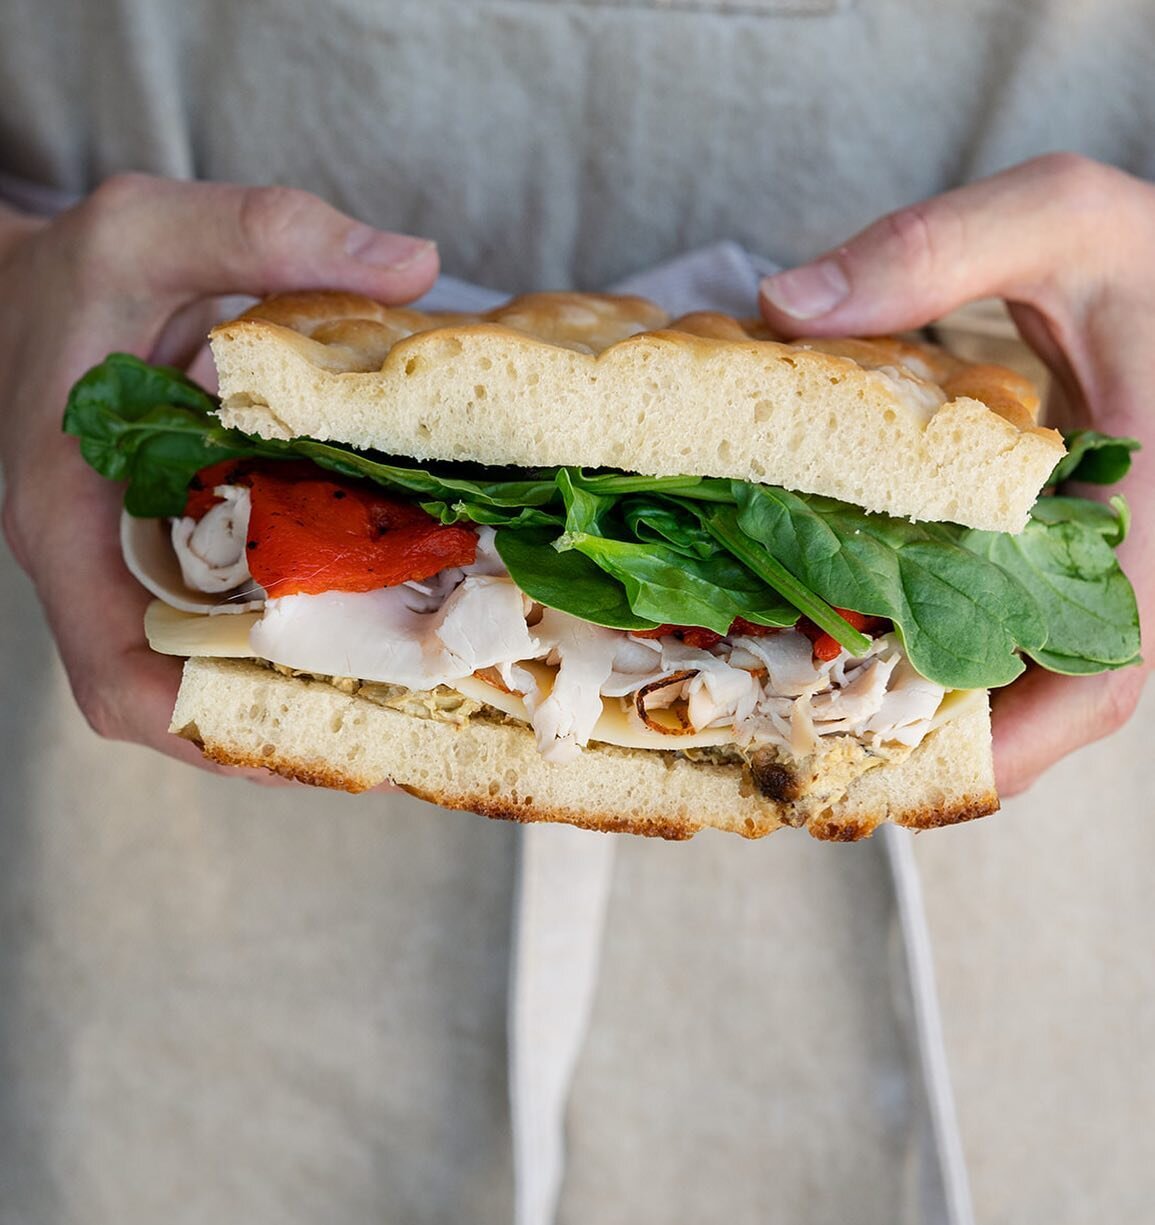 The best selling sandwich of last weekend! Our Turkey Sandwich is loaded with oven roasted turkey, roasted red peppers, havarti, baby spinach, and our Lemony Artichoke Spread. 

Our lemony artichoke spread (also sold separately 😉) was inspired by ou